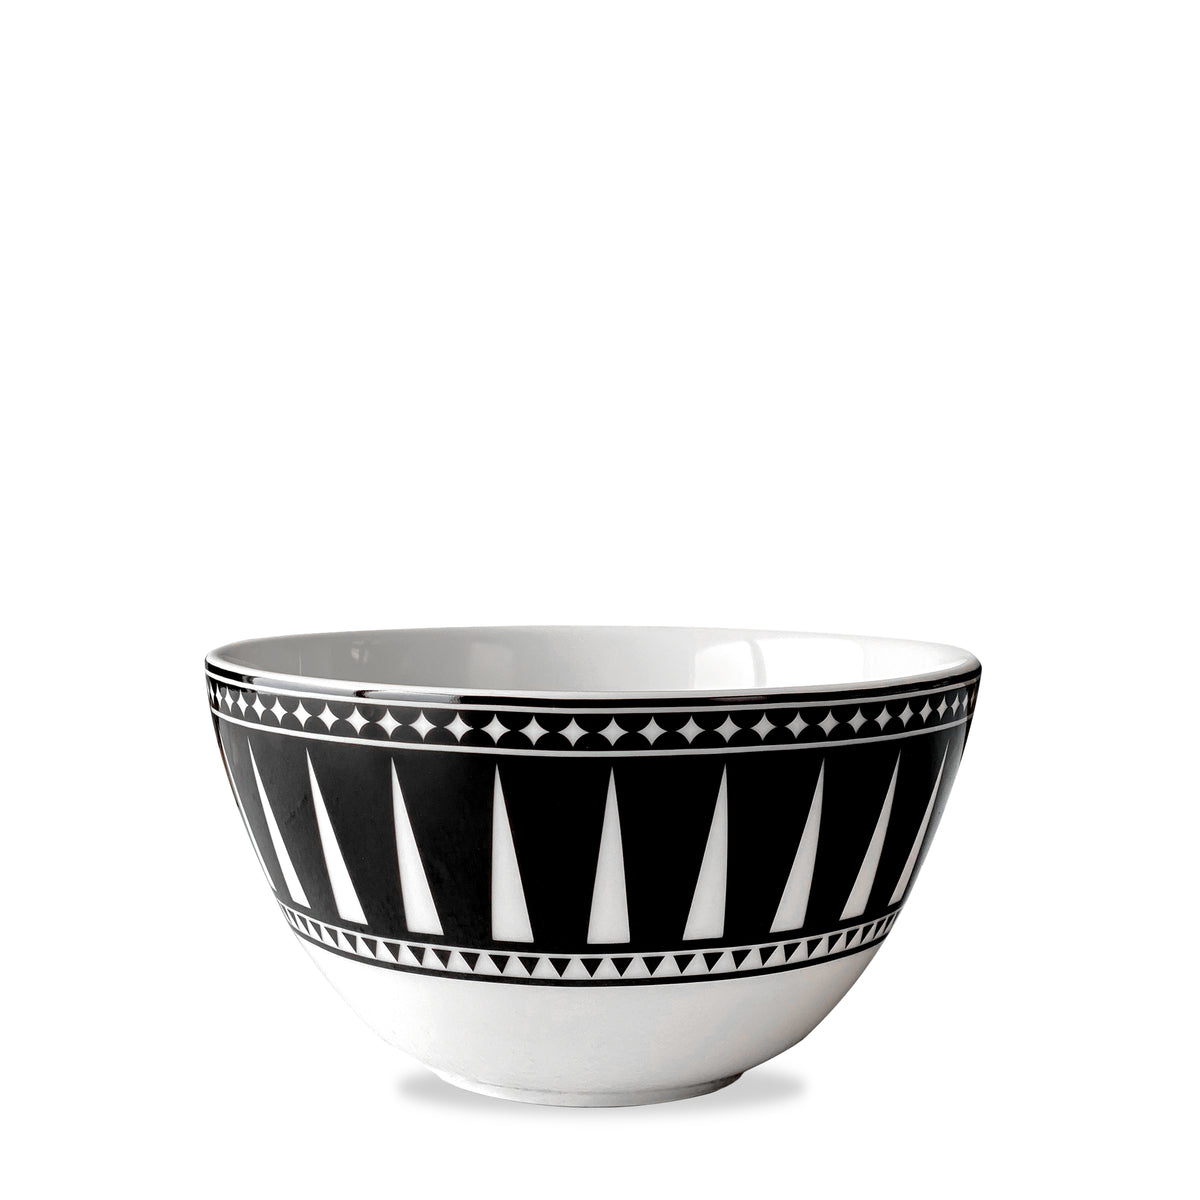 A white high-fired porcelain bowl with a black geometric pattern around the exterior, reminiscent of Art Deco inspired ceramics, the Marrakech Cereal Bowl by Caskata Artisanal Home.